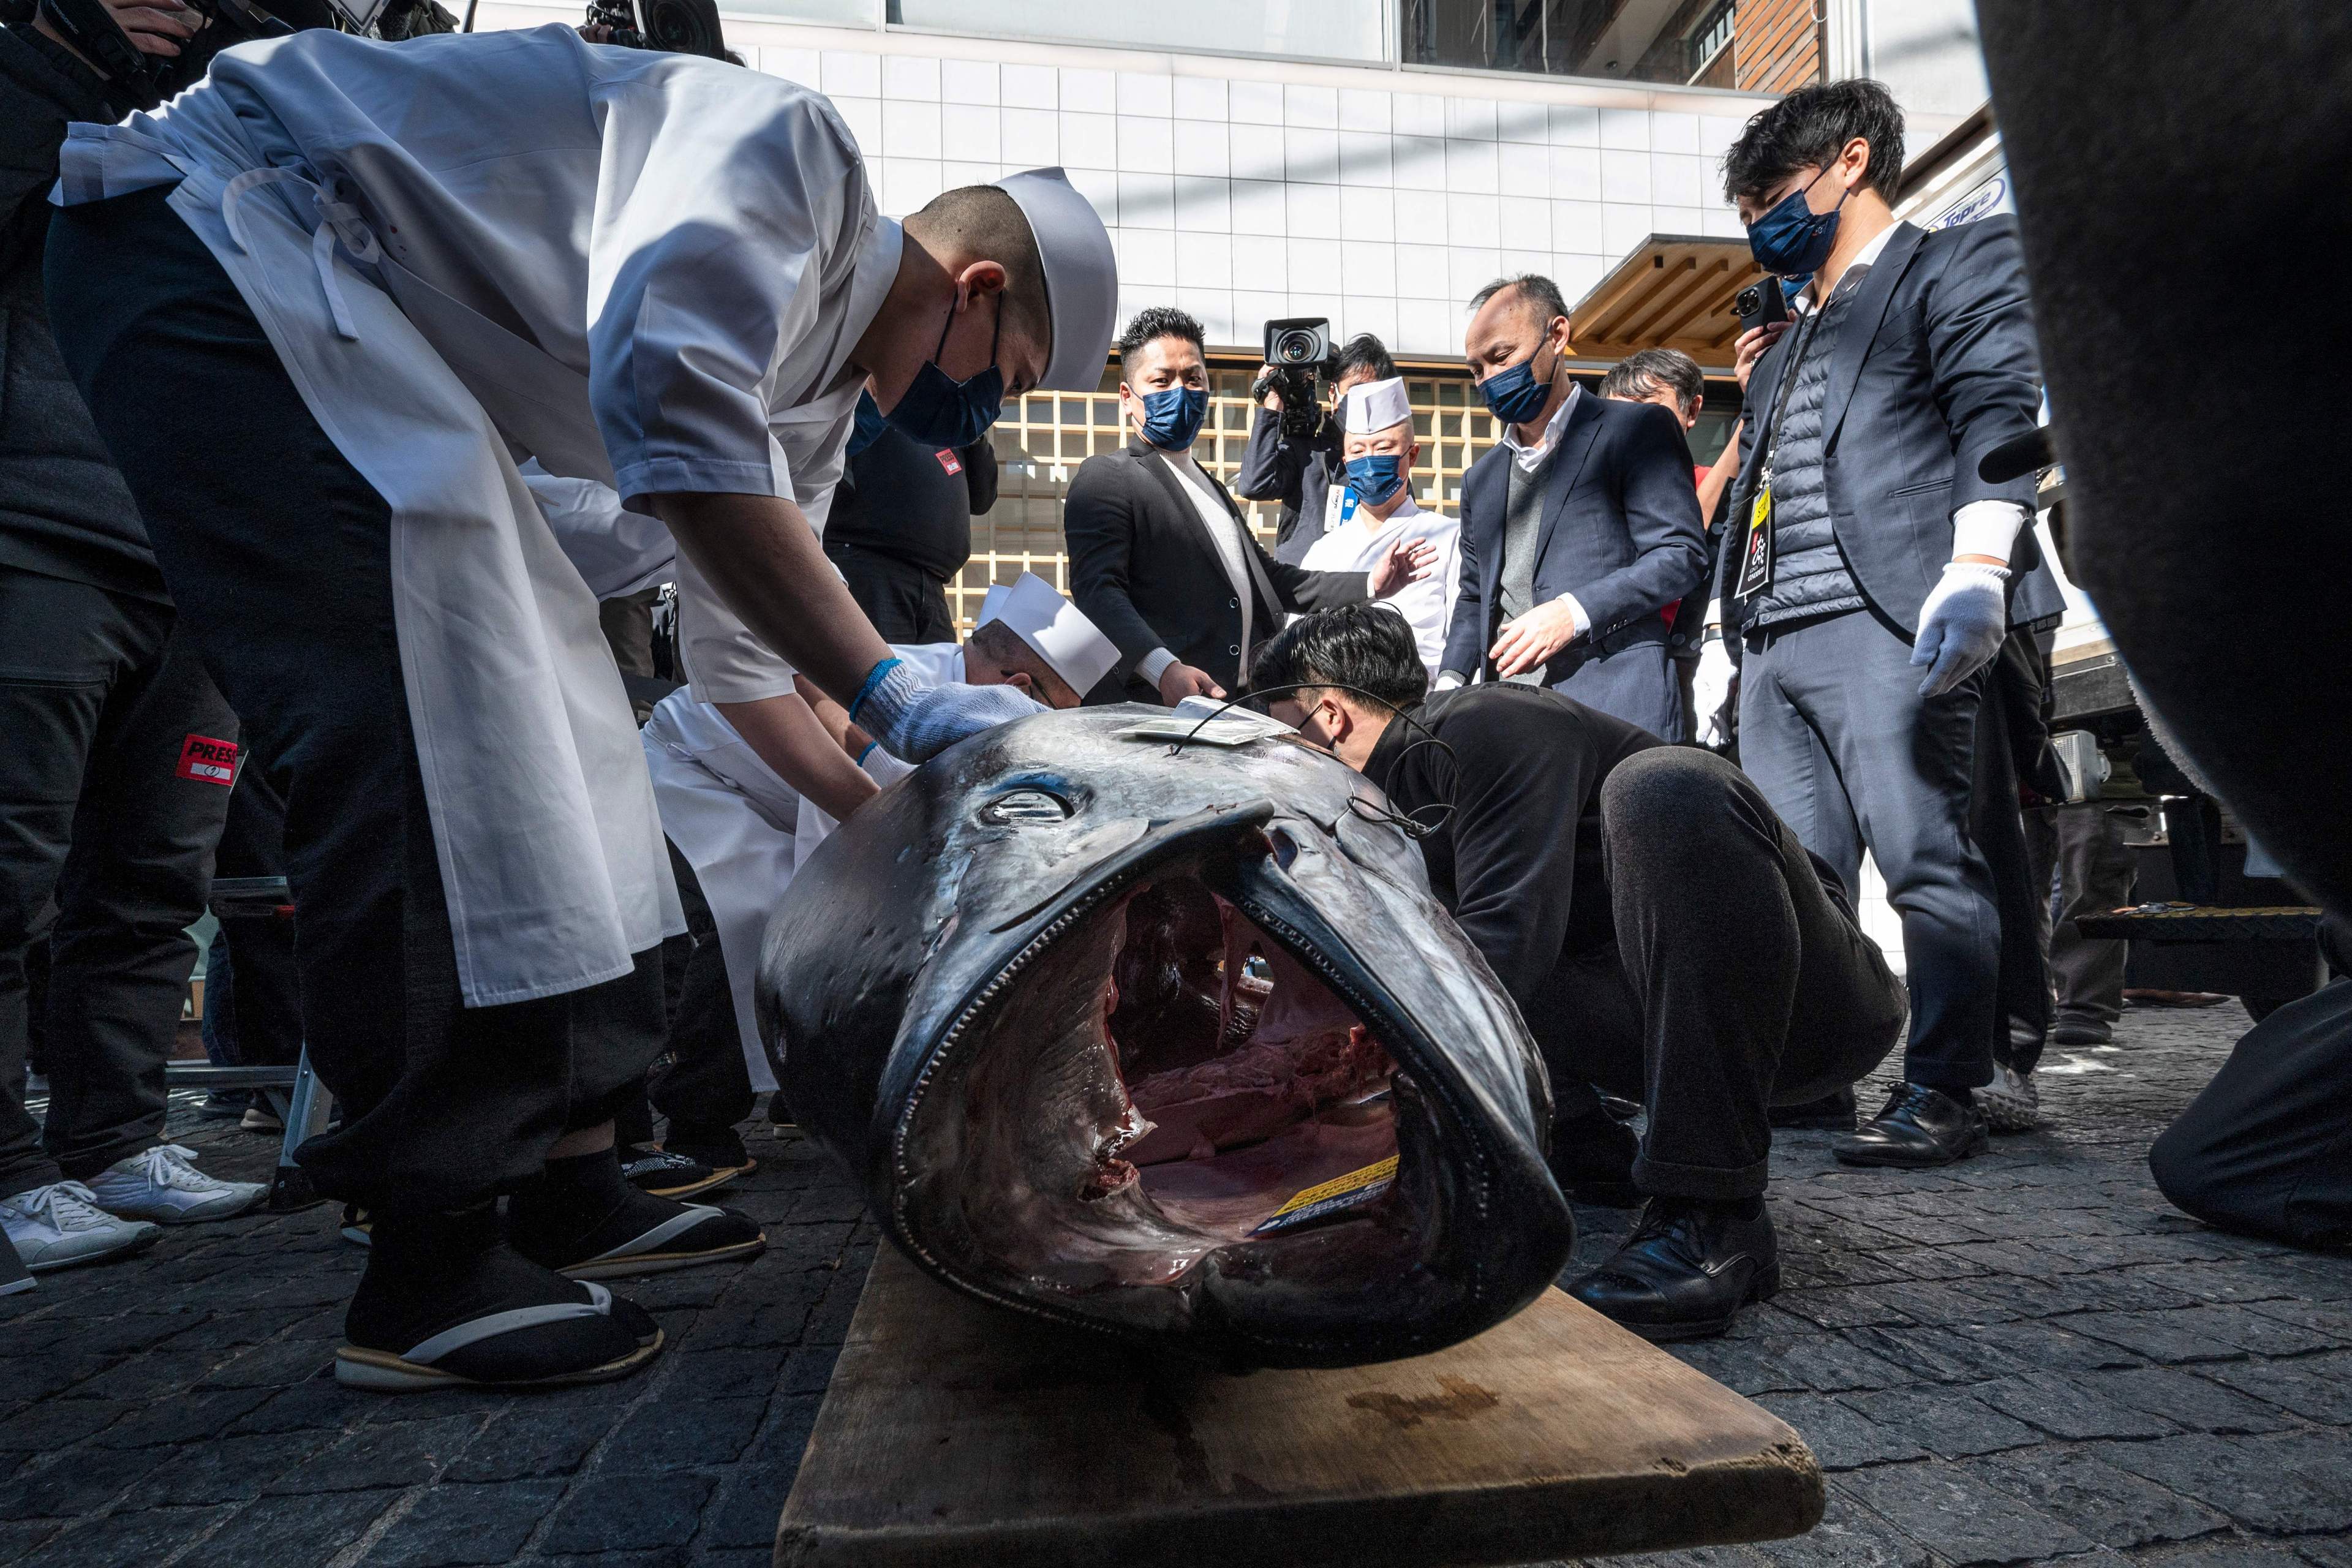 A group of masked people, including chefs, are gathered around a large fish on a wooden surface, preparing it for cutting or inspection in an outdoor setting.